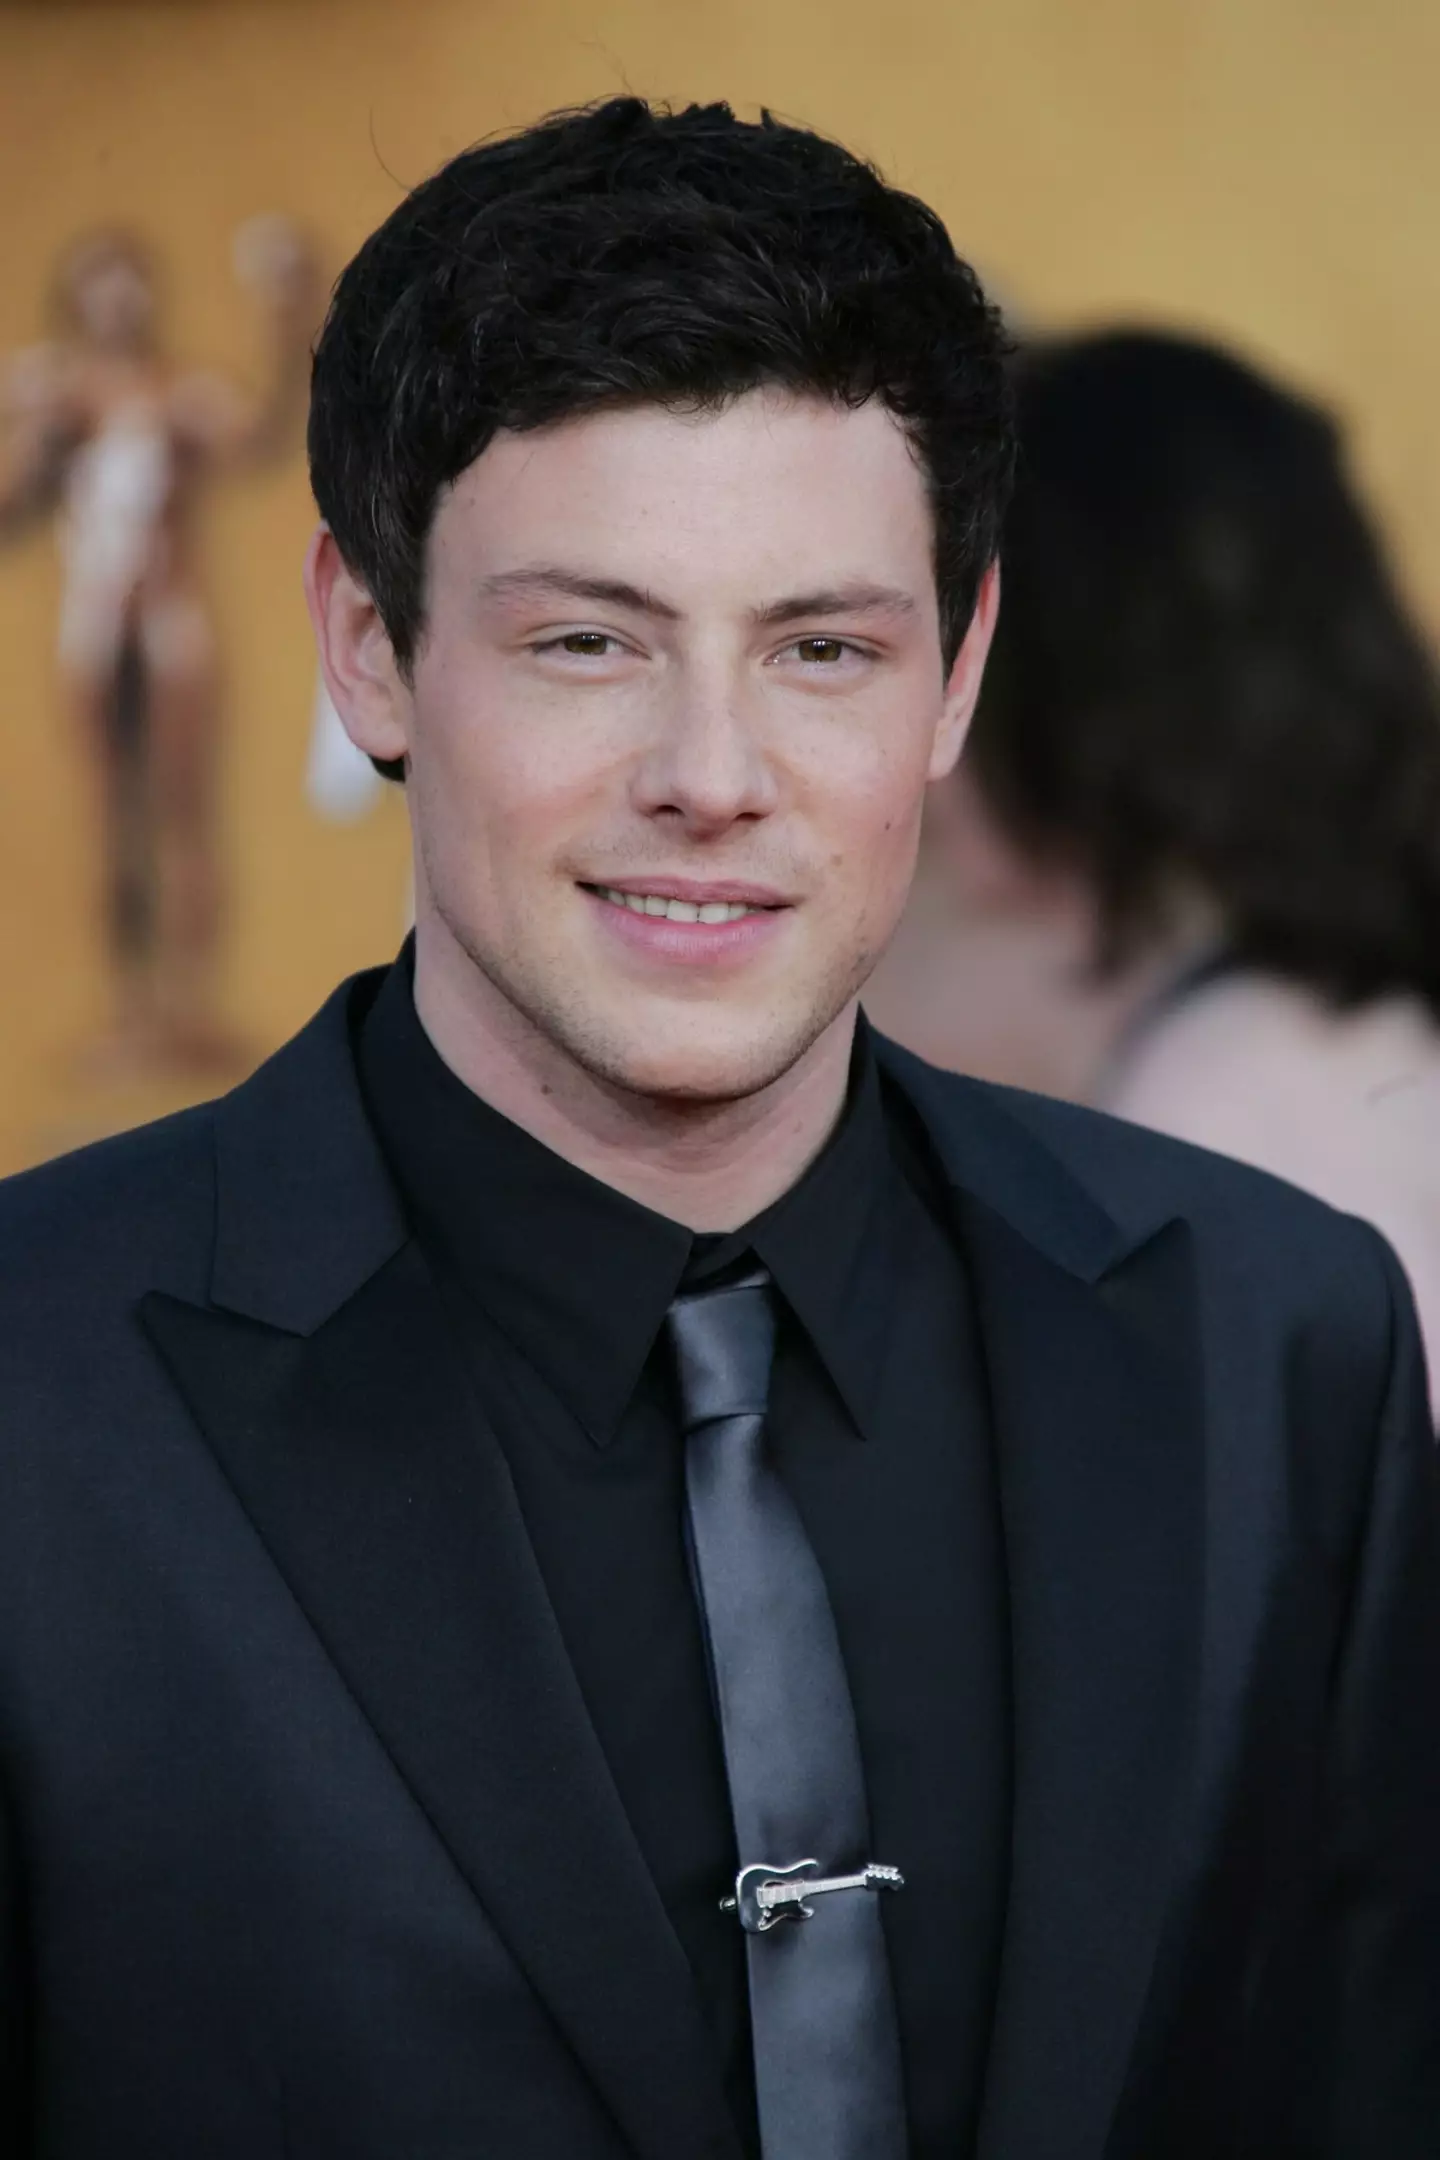 Cory Monteith tragically passed at 31 years old.